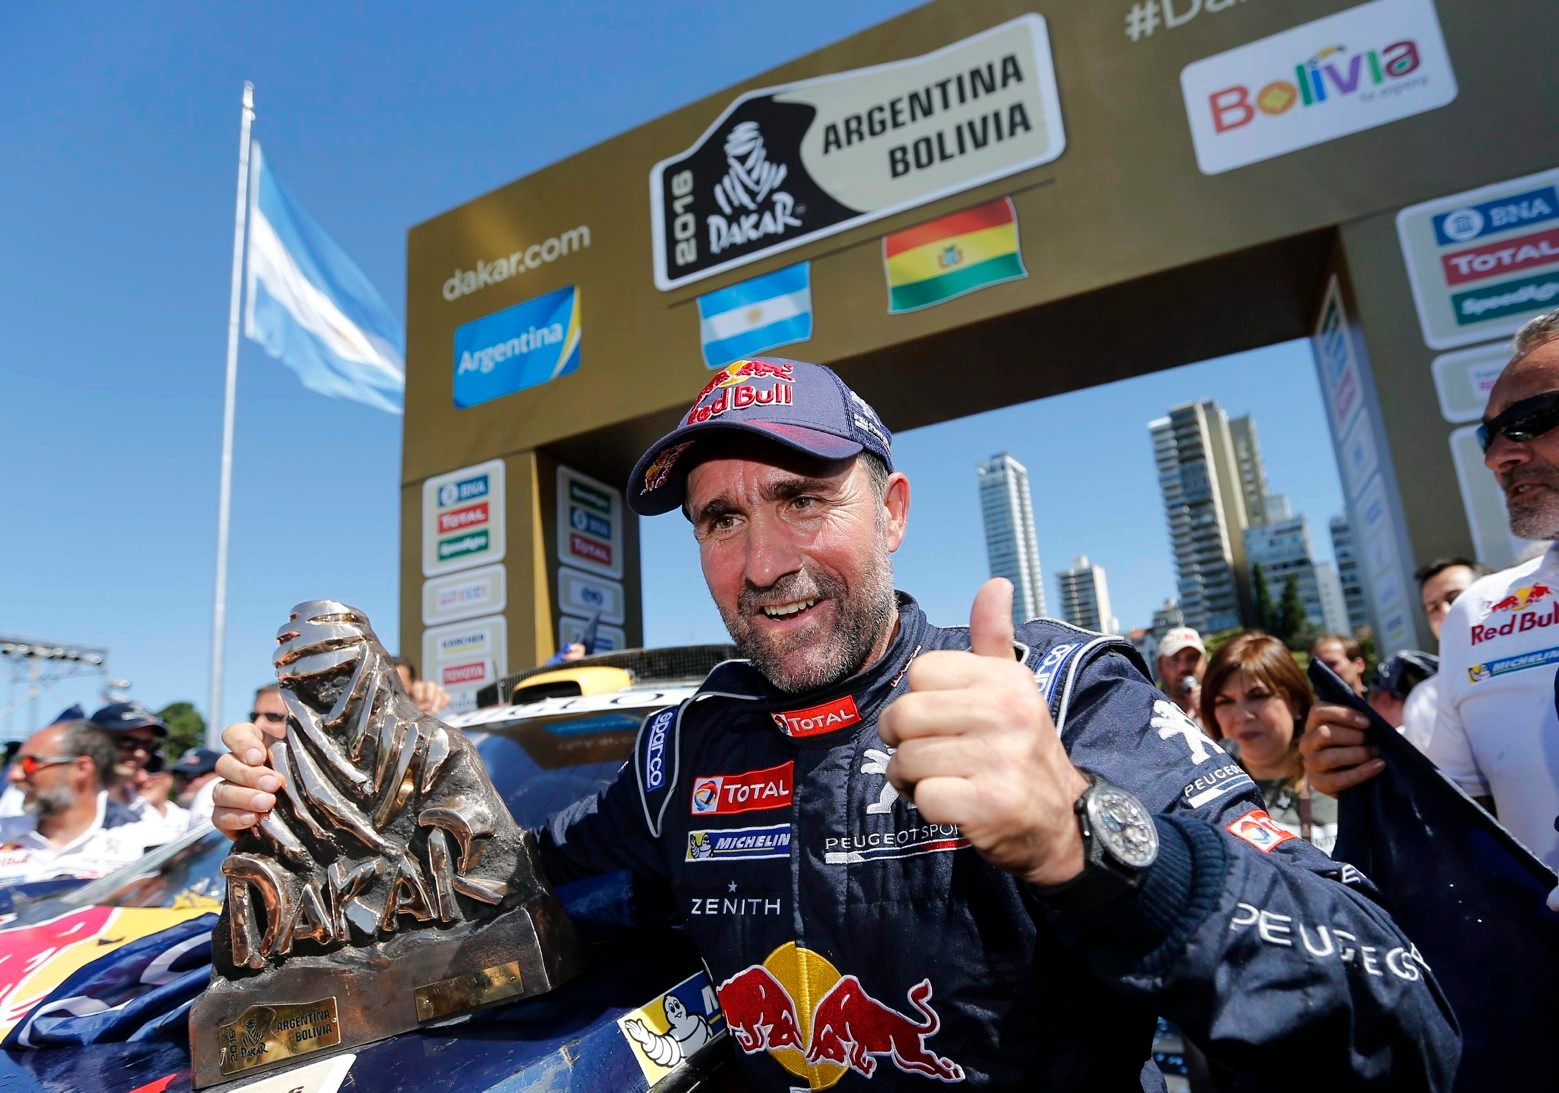 Peugeot driver Stephane Peterhansel, of France, flashes a thumb up after receiving a 2016 Dakar Rally winner's trophy, in Rosario, Argentina Saturday, Jan. 16, 2016. Peterhansel won the Dakar Rally for the 12th time - sixth in a car - after finishing in the 13th and final stage on Saturday. (AP Photo/Jorge Saenz) Argentina Rally Dakar